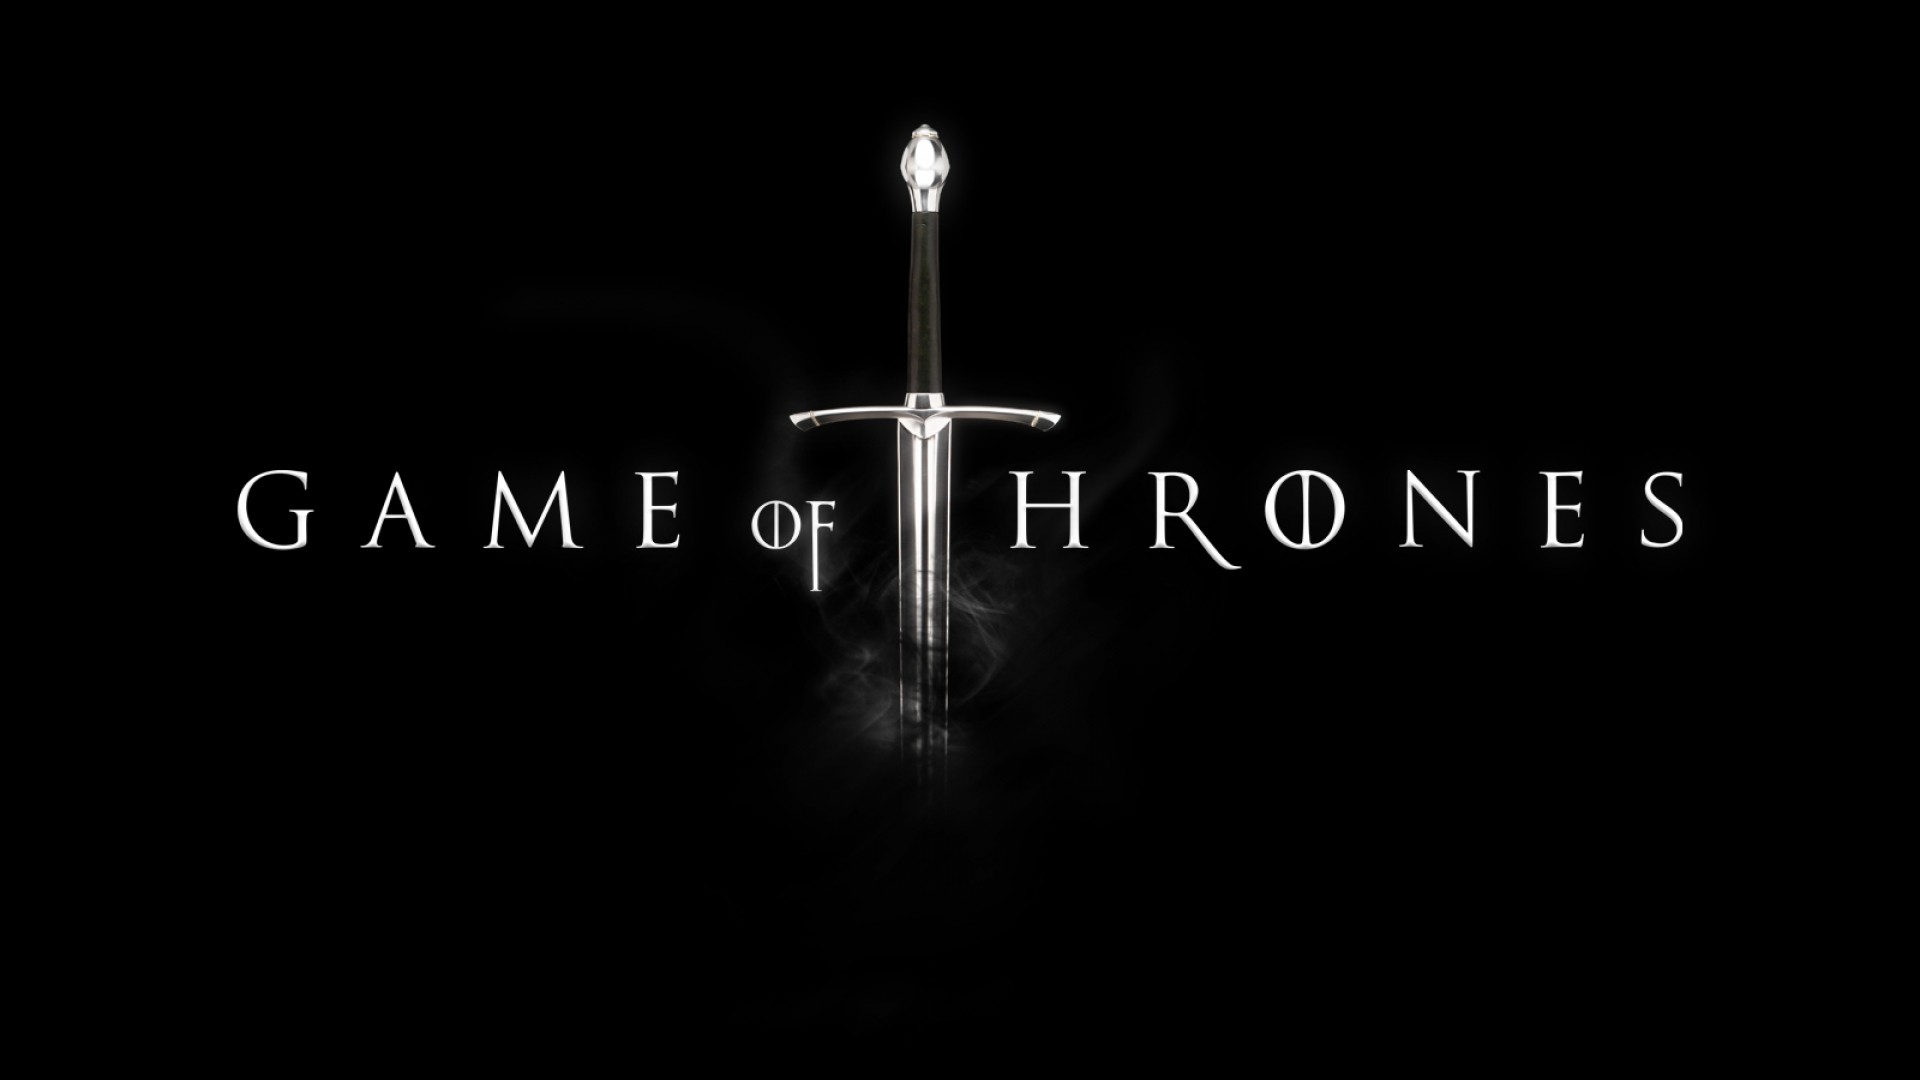 Download Game Of Thrones HD Wallpaper 1970 Full Size